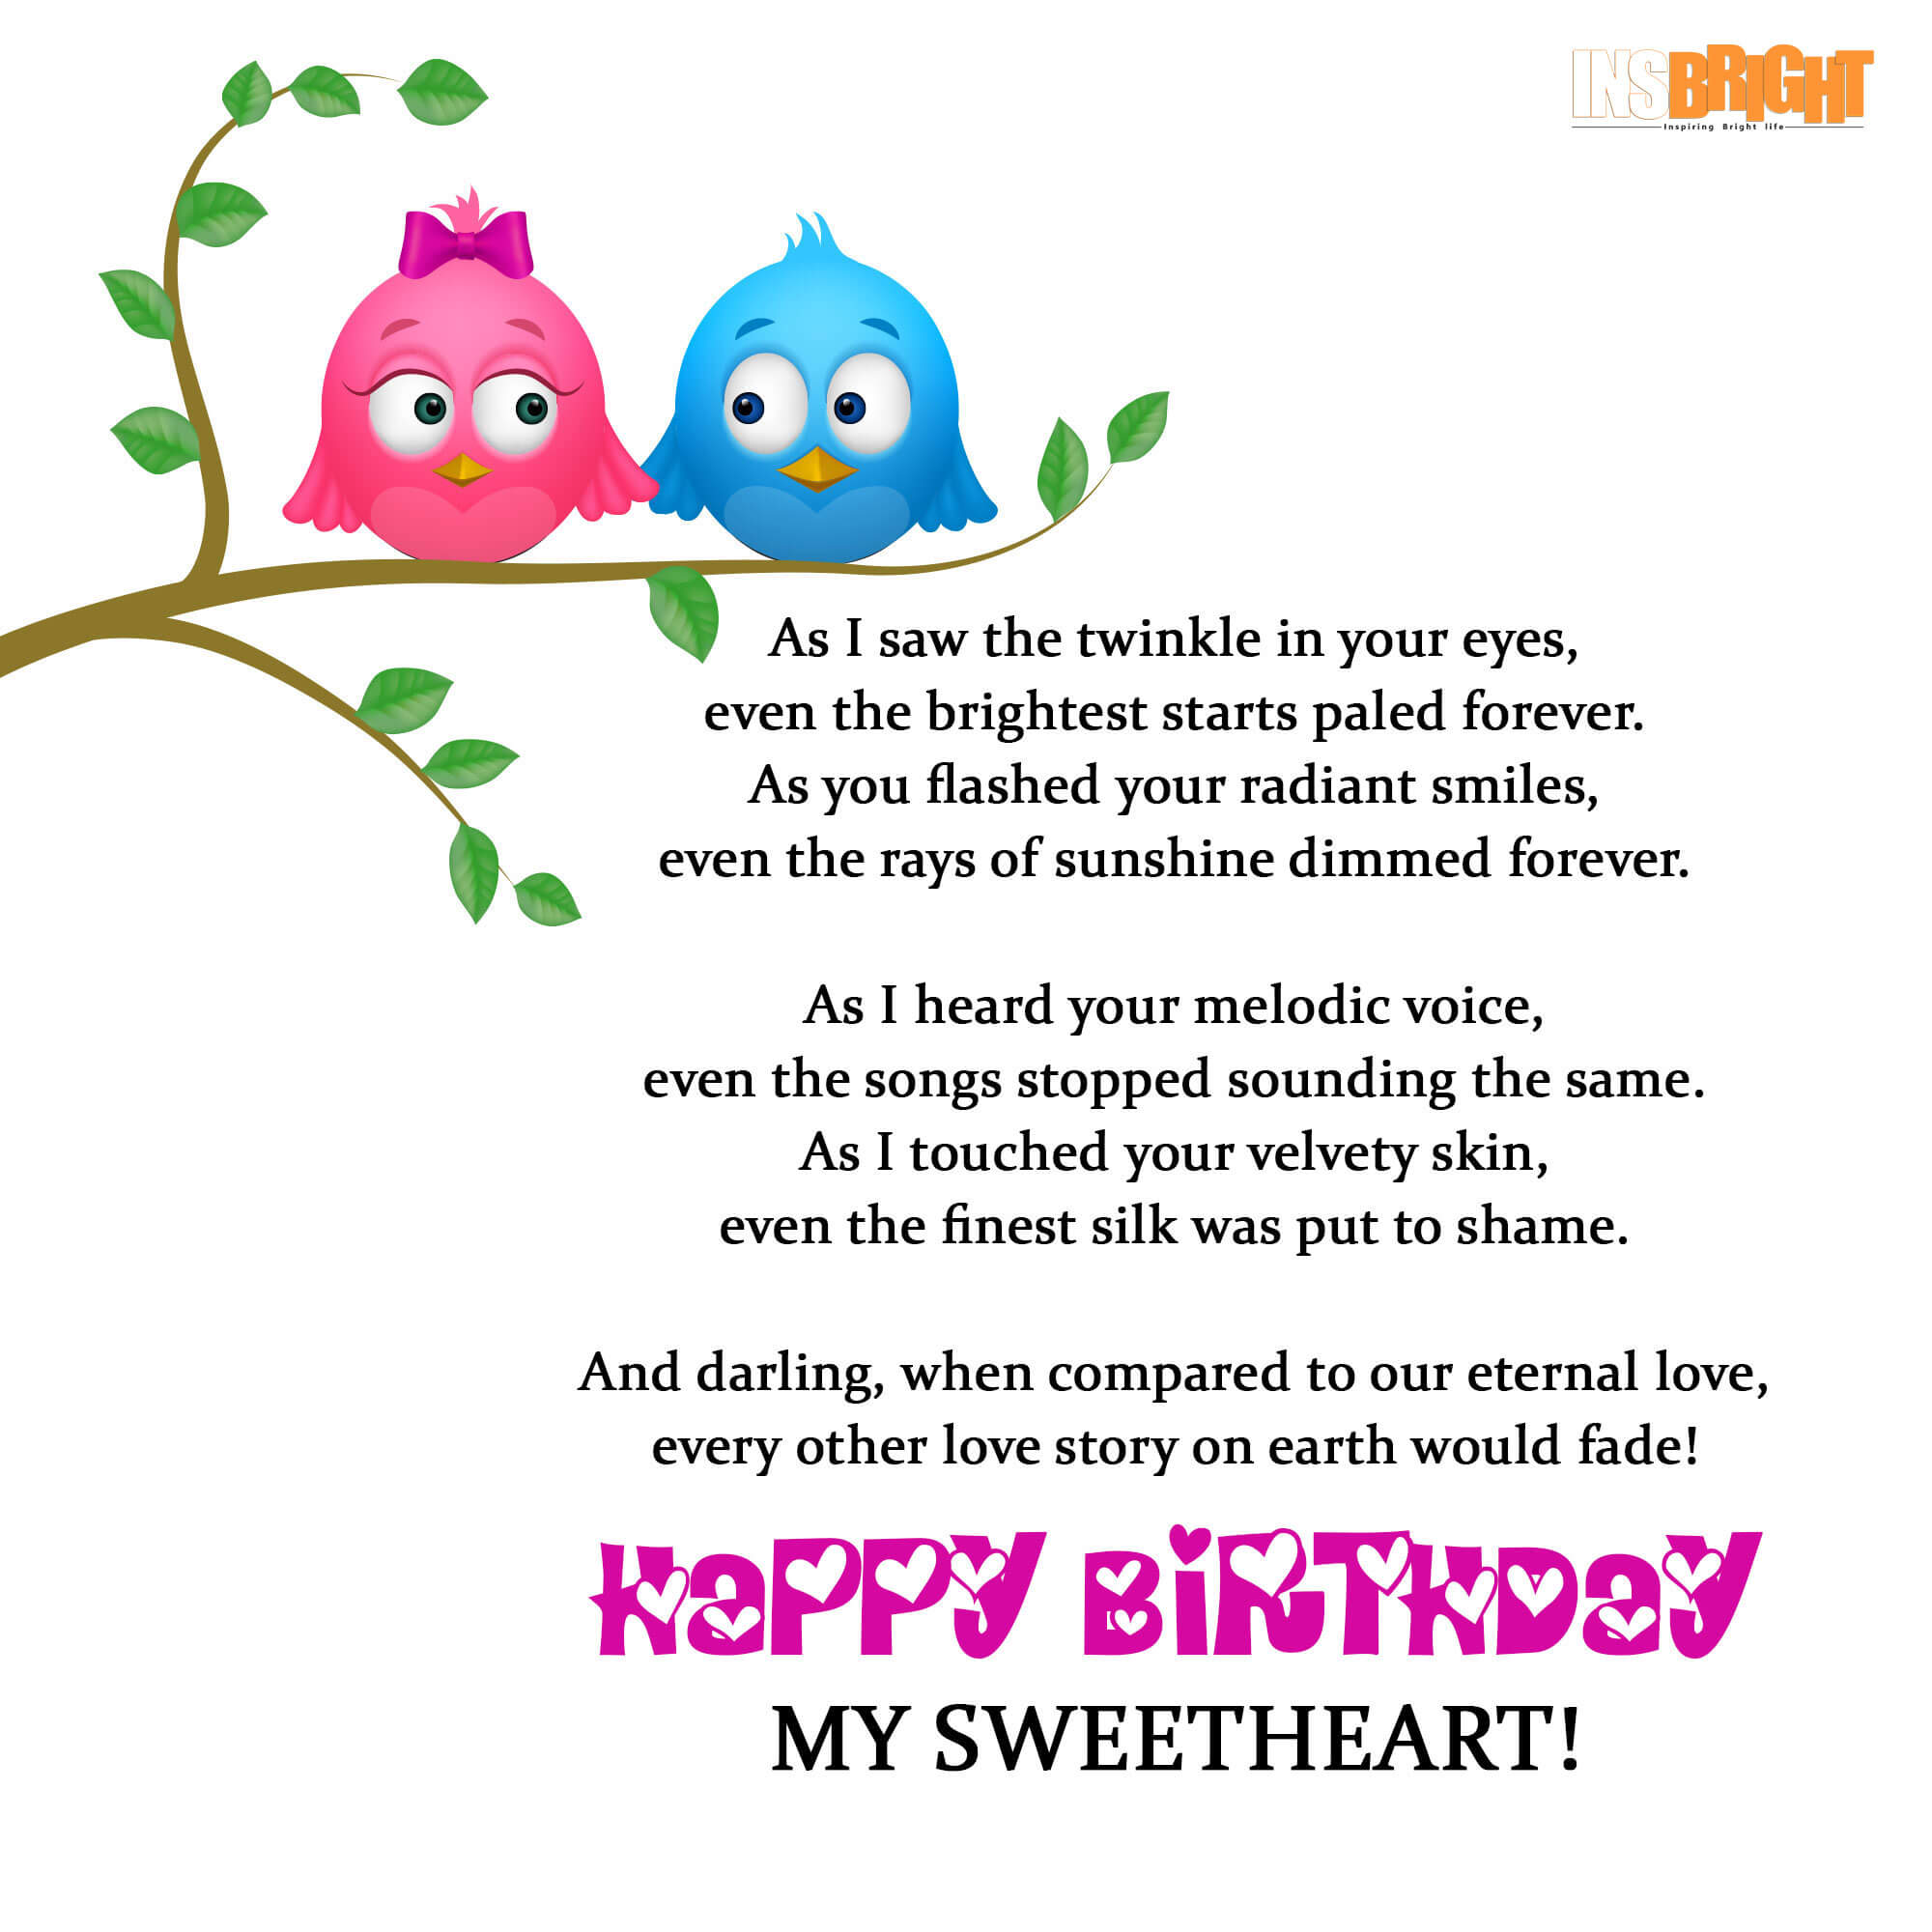 10+ Romantic Happy Birthday Poems For Wife With Love From Husband | Short Birthday  Poems For Her | Insbright